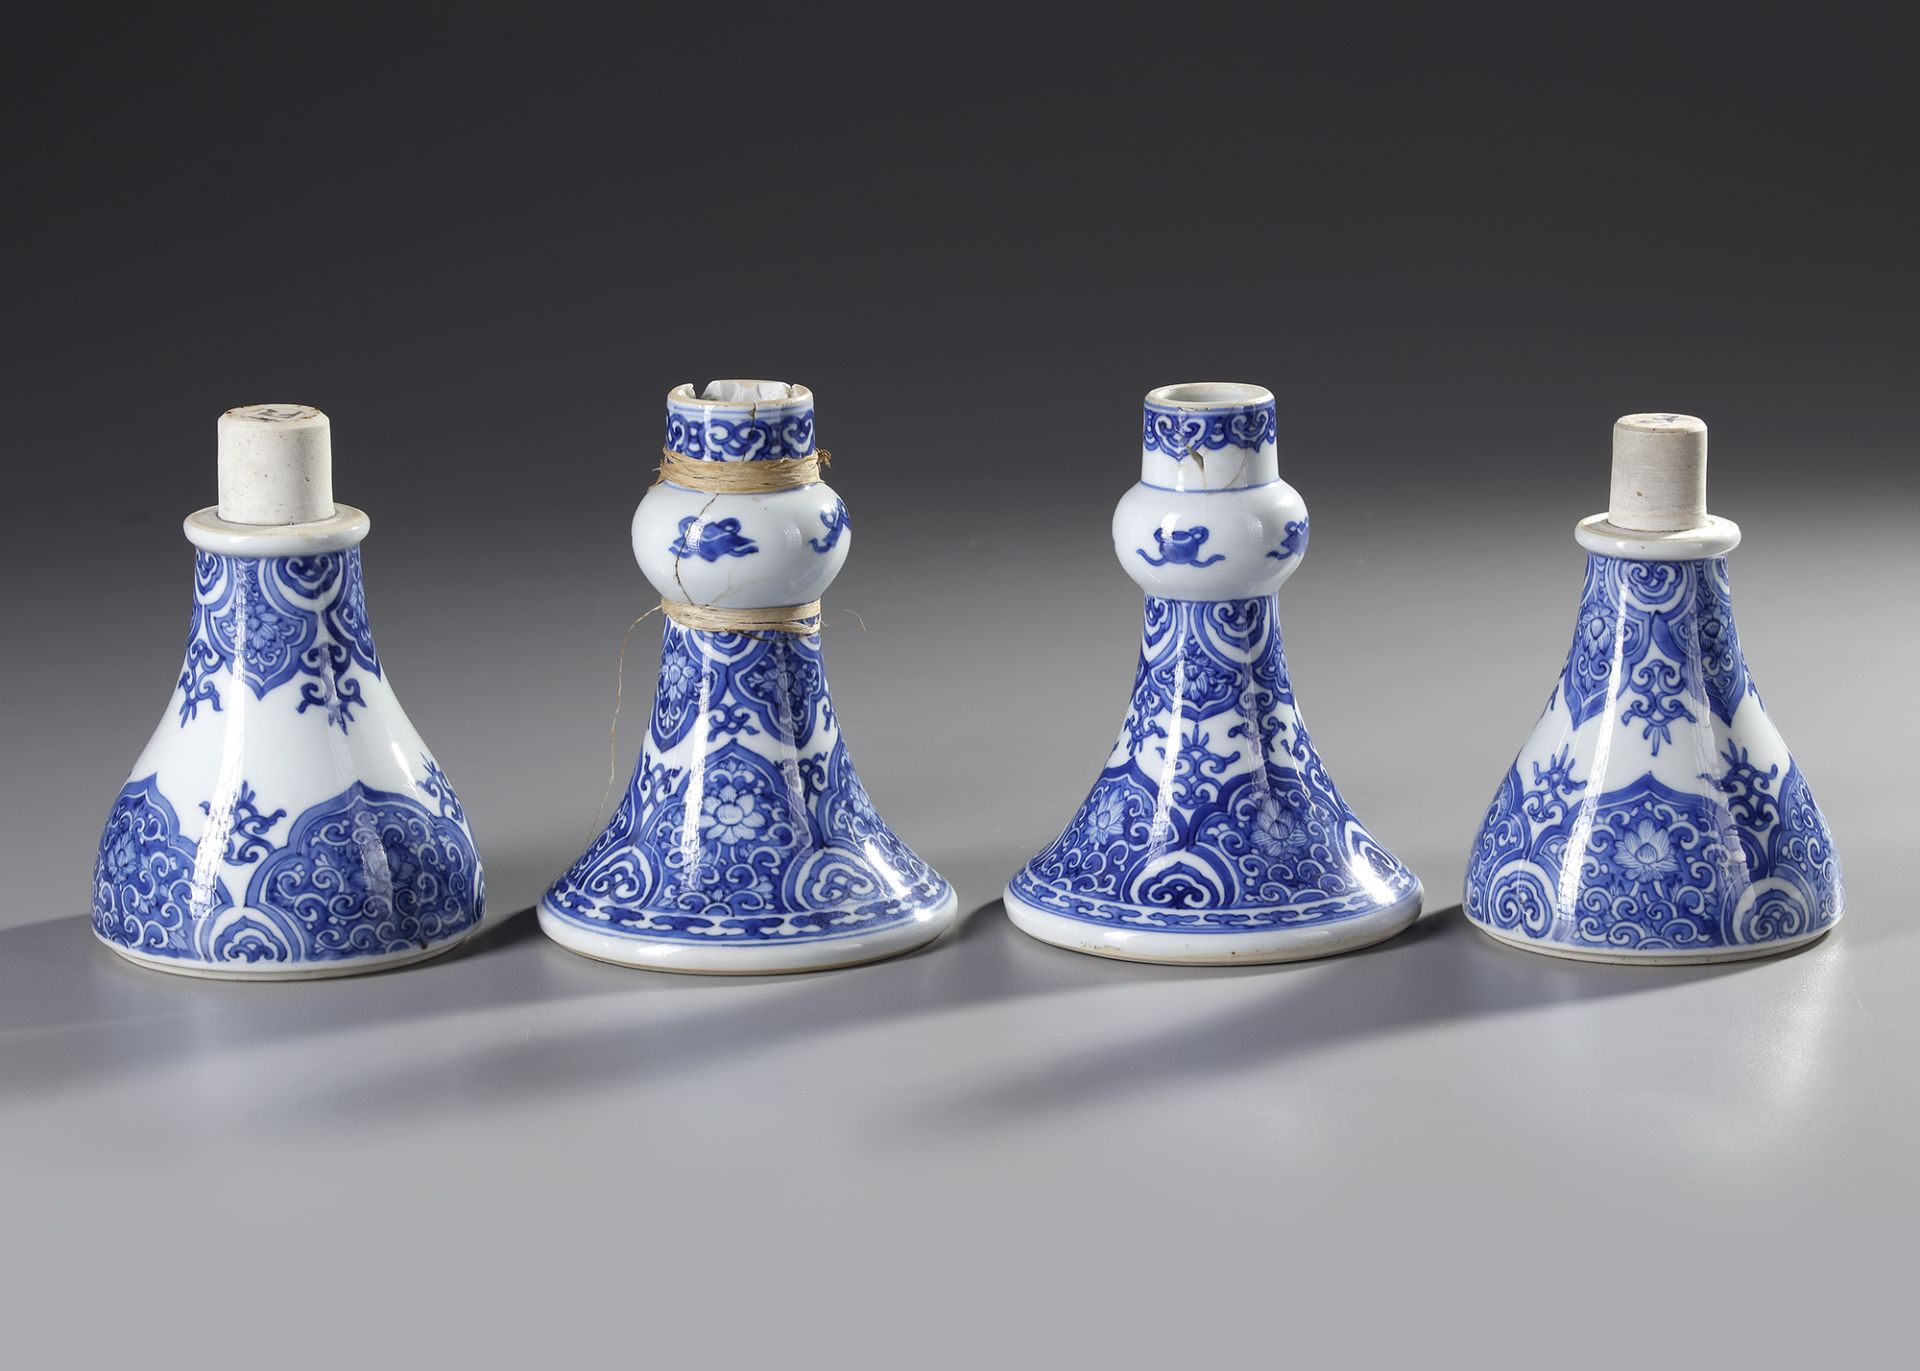 A PAIR OF BLUE AND WHITE POSSIBLY LANTERNS, KANGXI PERIOD (1662-1722) - Image 3 of 4